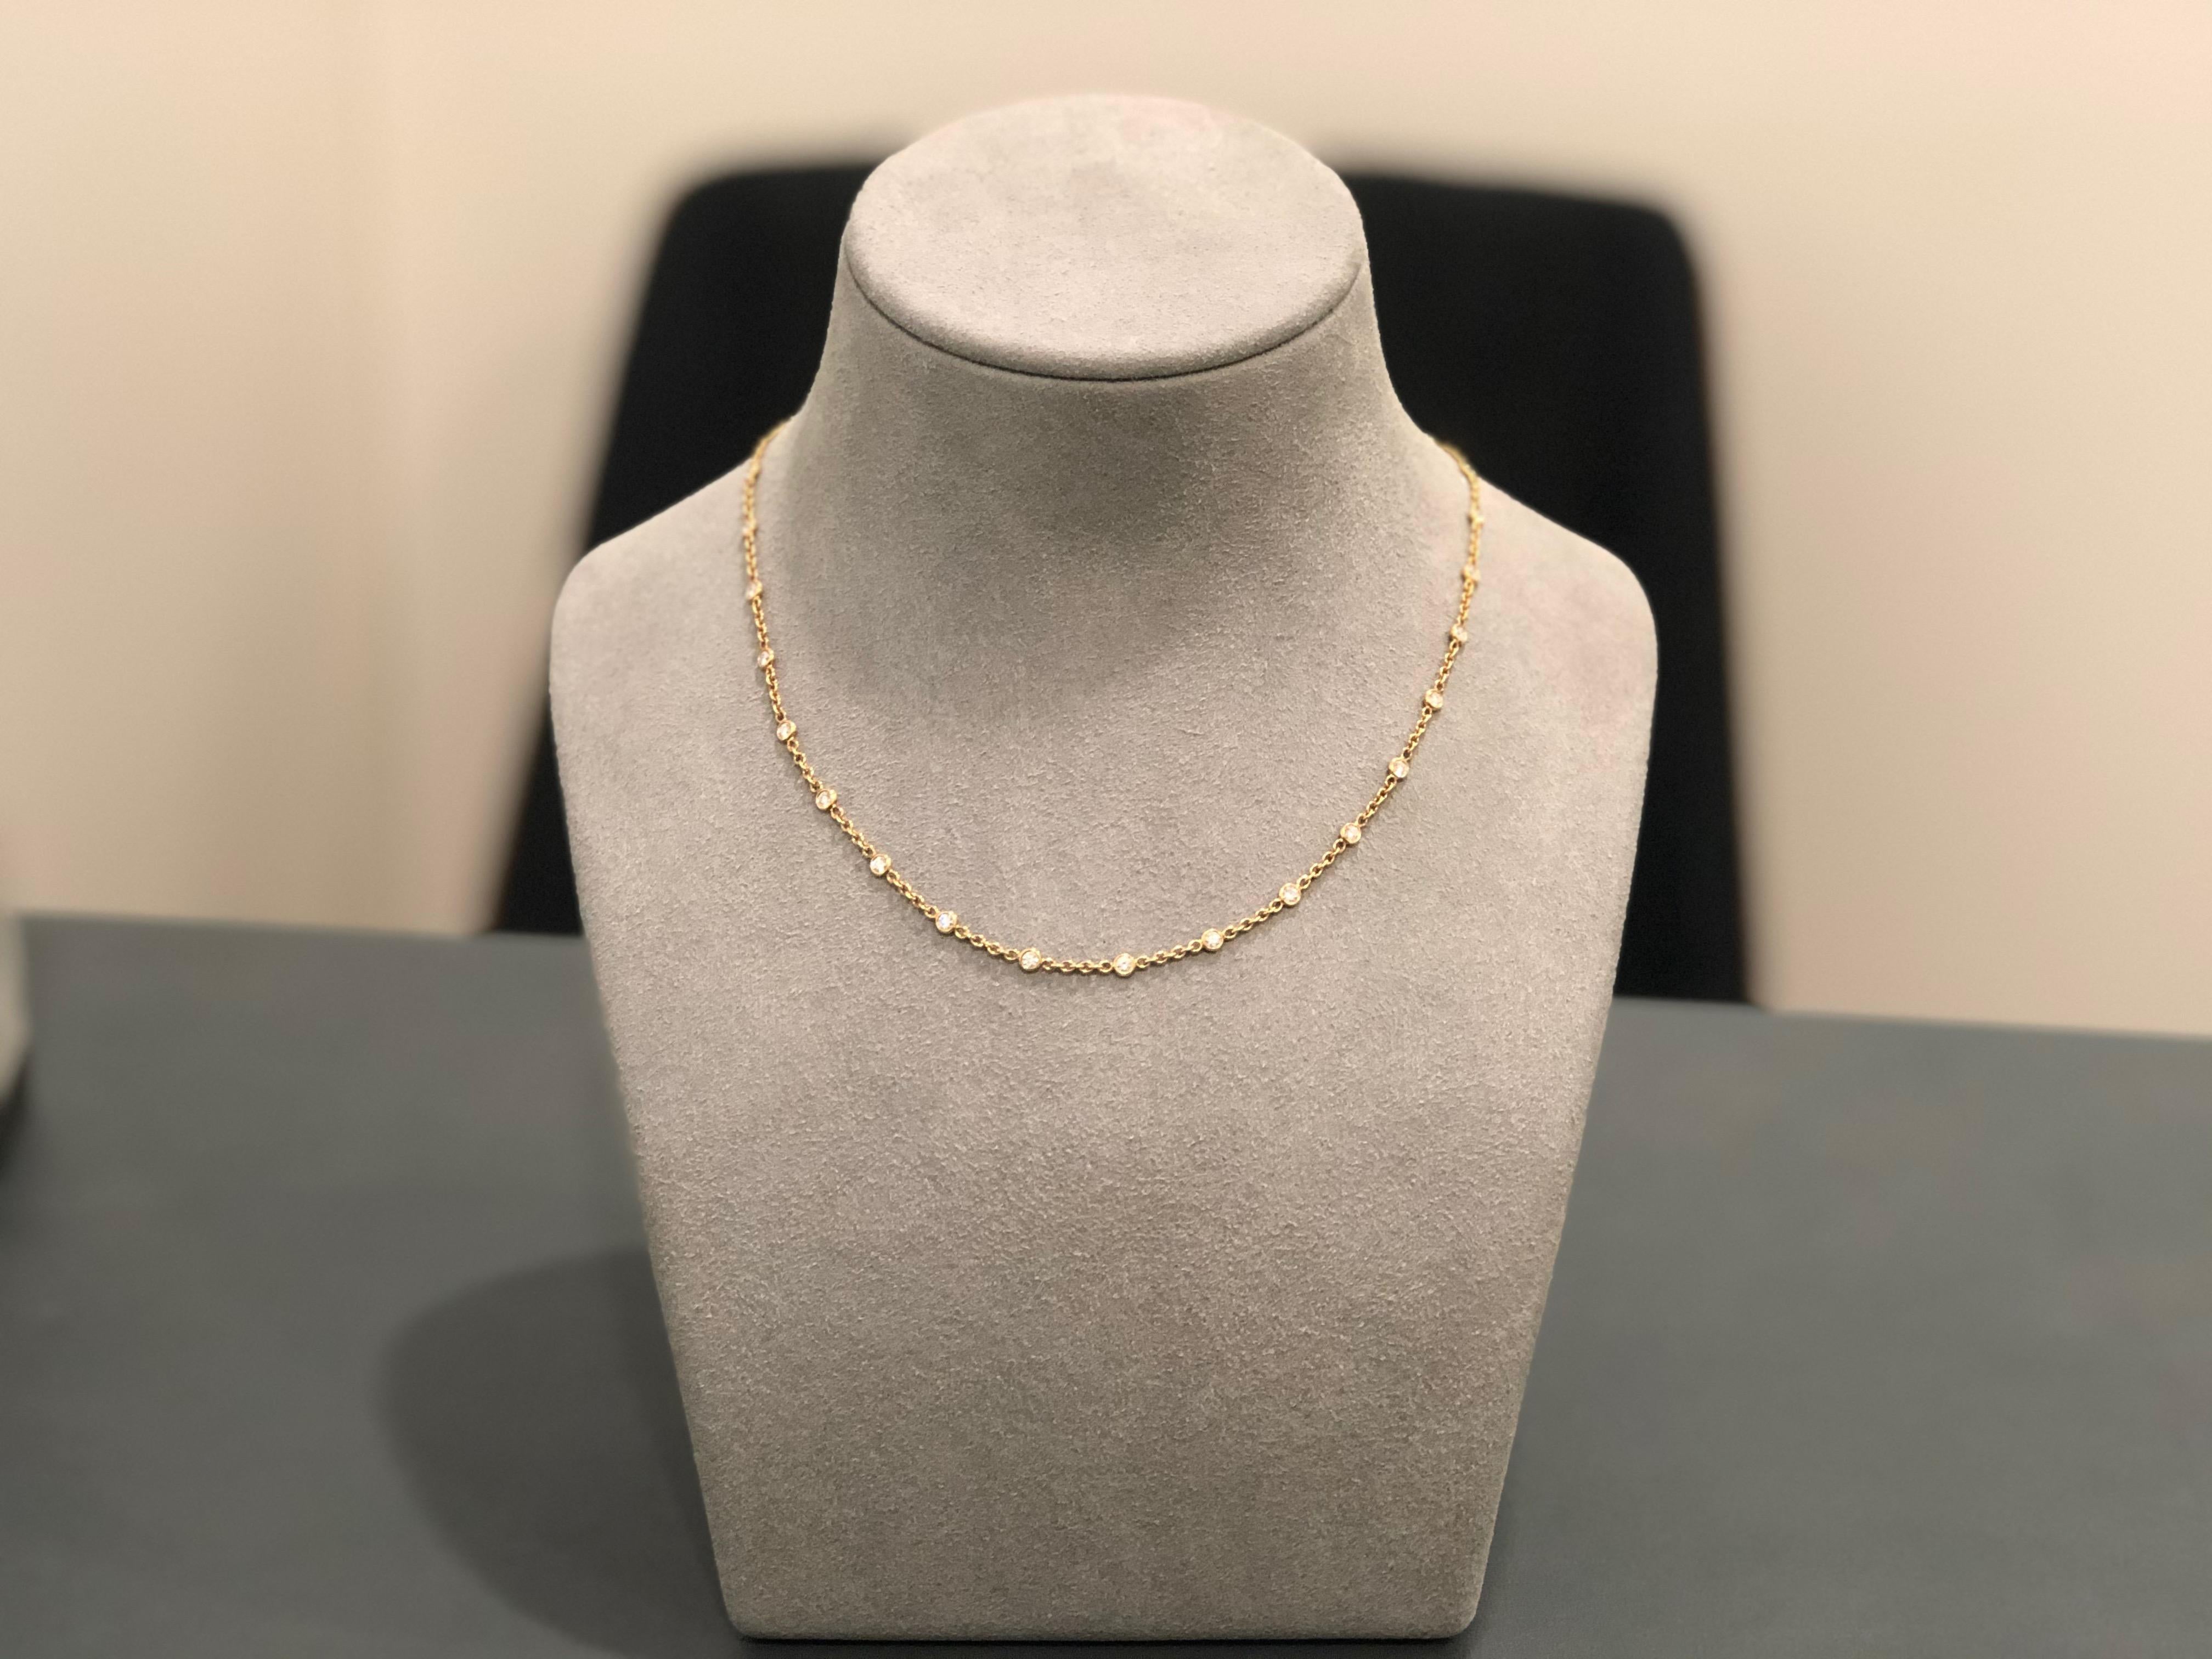 Round Cut Roman Malakov 1.12 Carat Total Round Diamond by the Yard Necklace in Yellow Gold